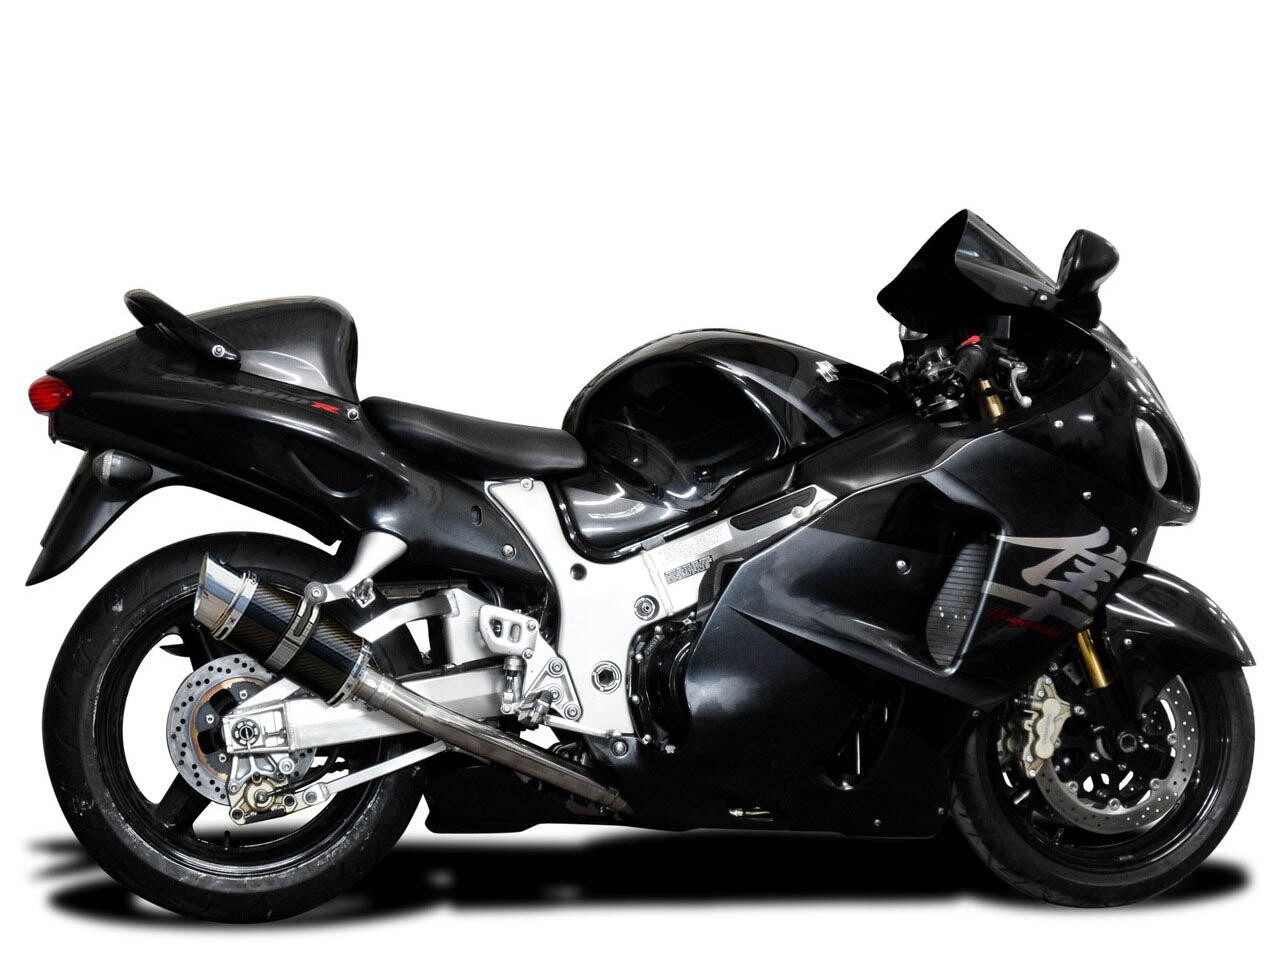 DELKEVIC Suzuki GSXR1300 Hayabusa (99/07) Full 4-2 Exhaust System with Mini 8" Carbon Silencers